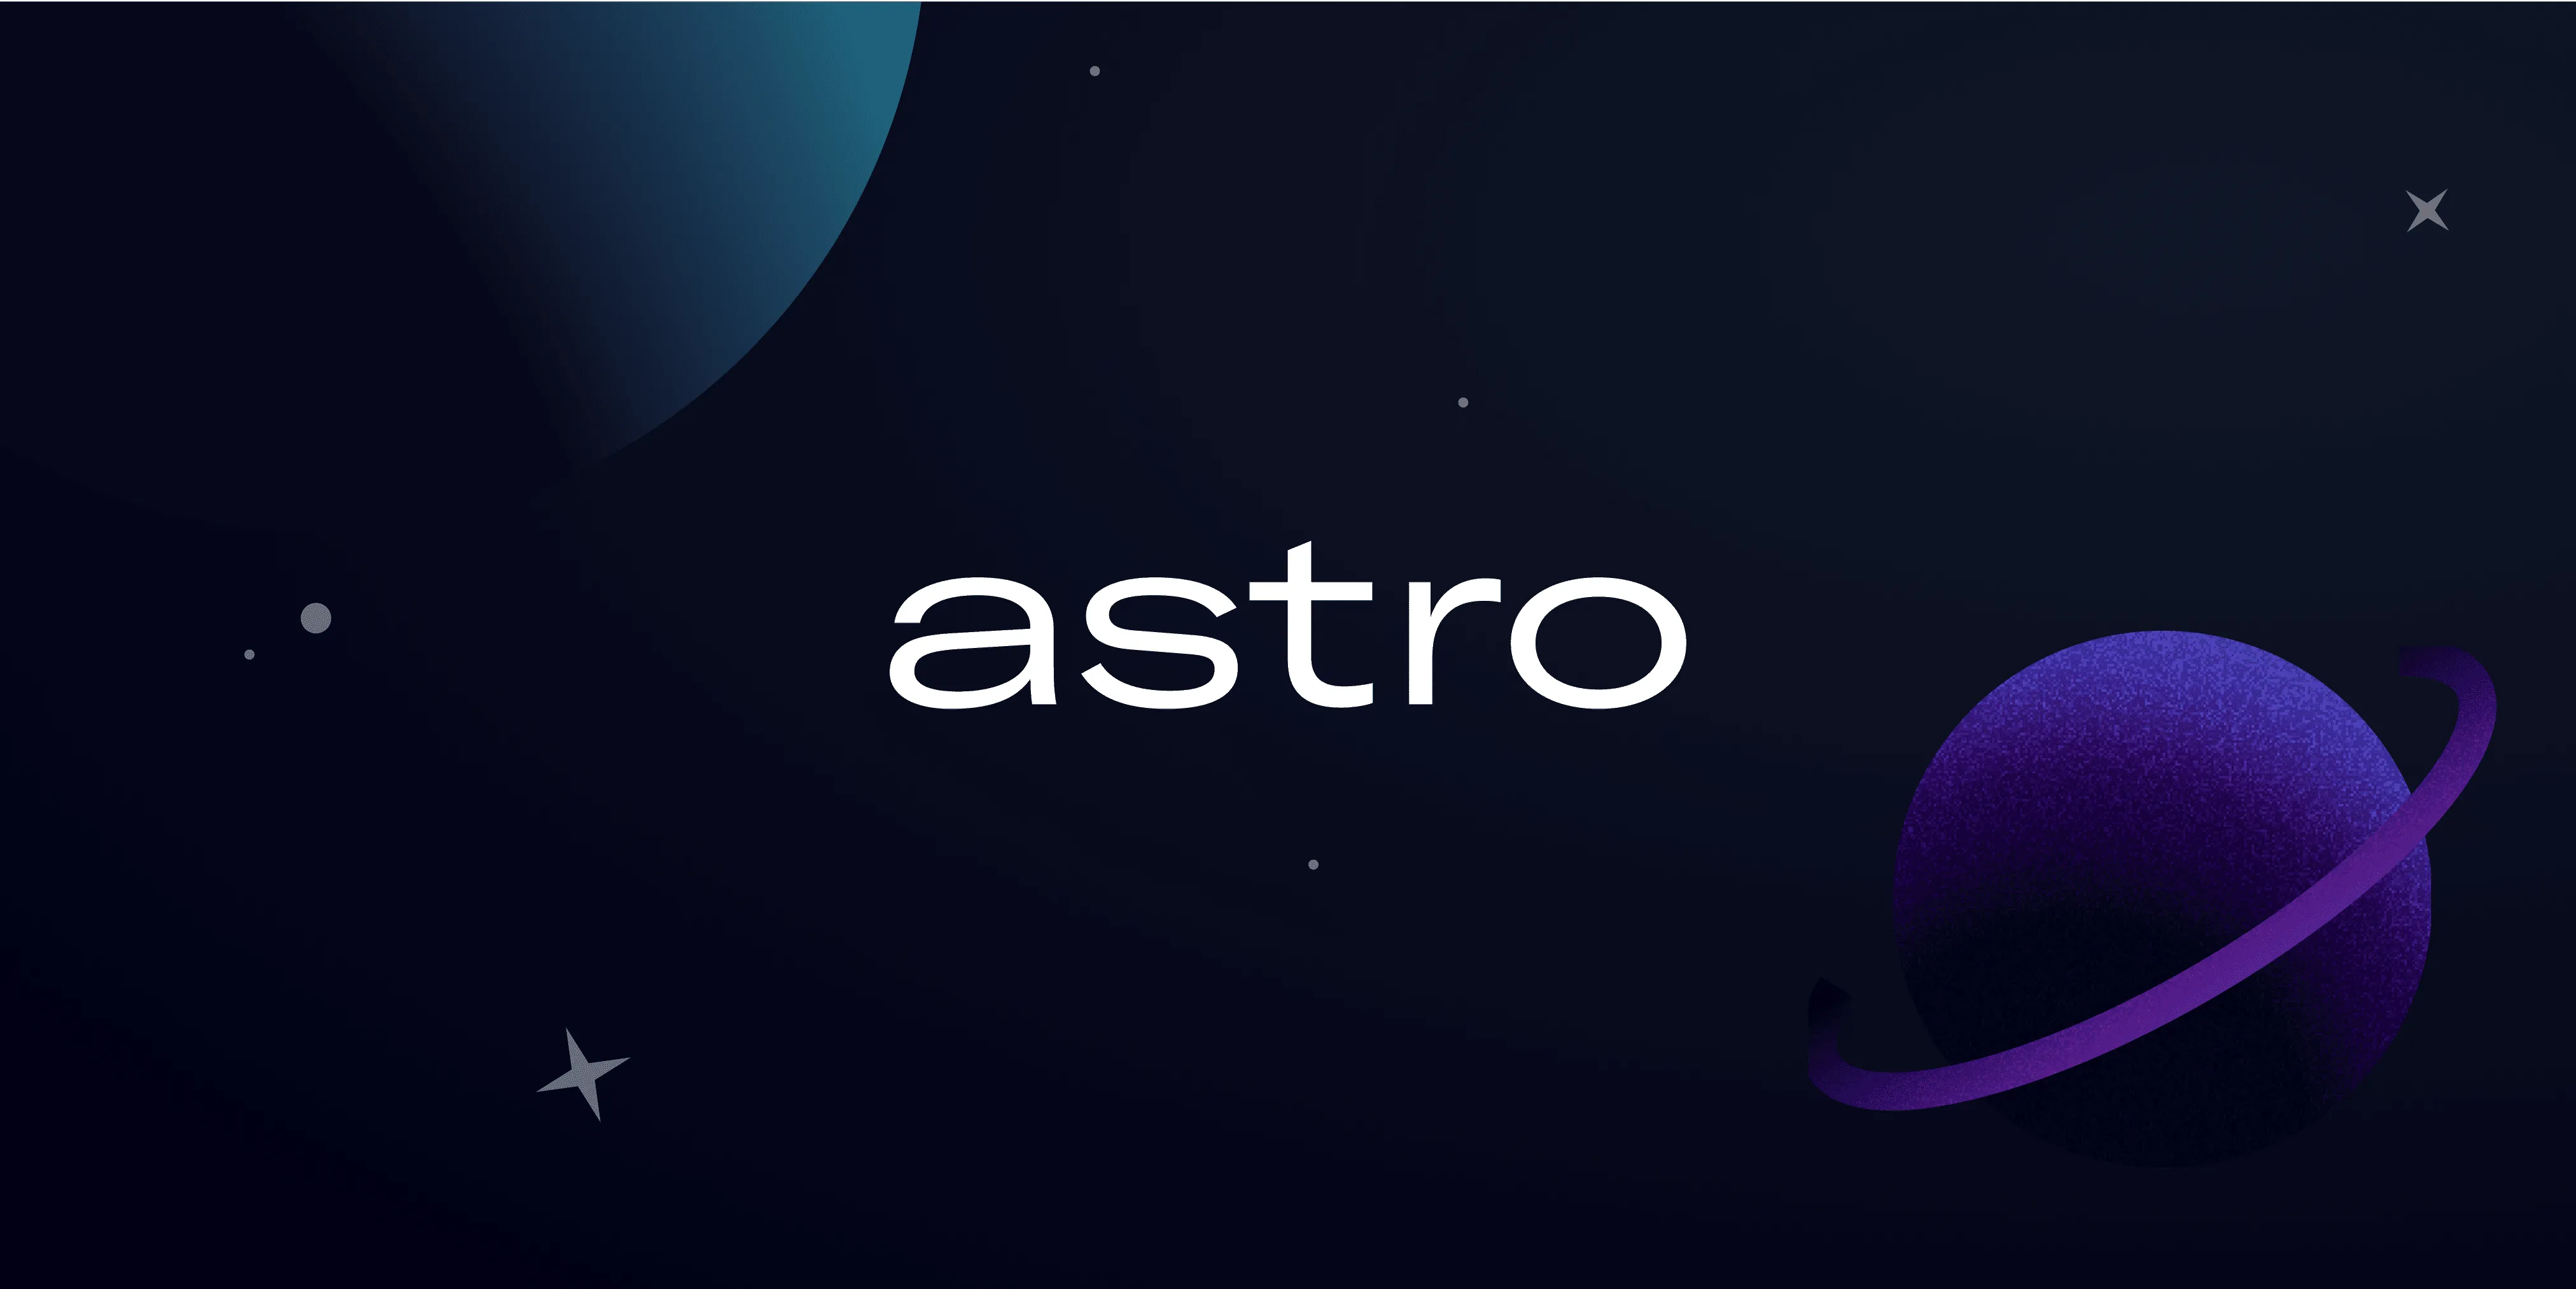 Astro v1.0 was announced not long ago with the support of server-side rendering. Most static-site generators that I have used before were single-page application frameworks (like Gatsby, Next.js, and Scully), whereas Astro is a multi-page application framework but slightly different! It was designed for building content-rich websites, and the support for MDX is why I made the transition.